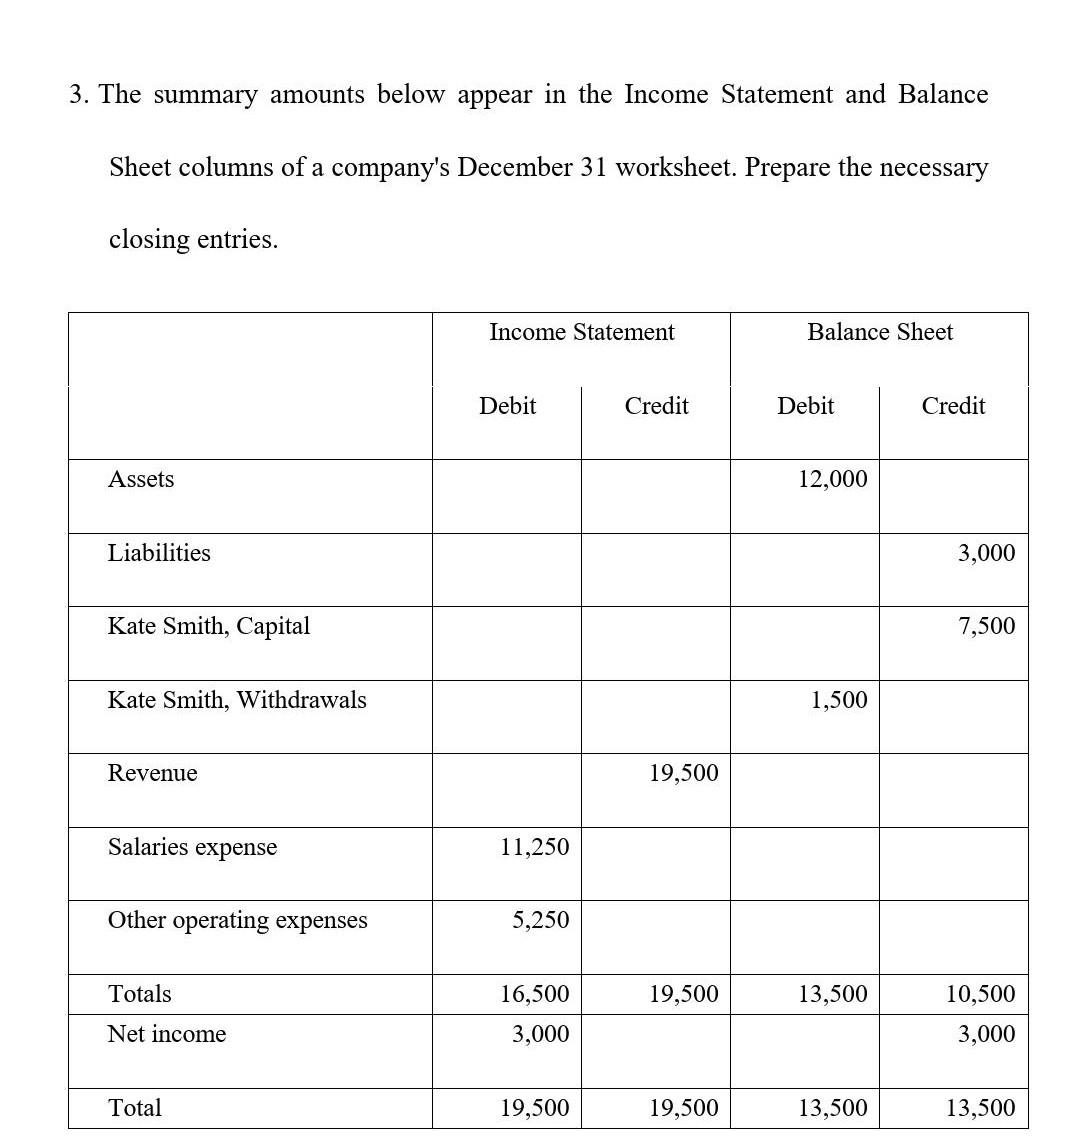 3. The summary amounts below appear in the Income Statement and Balance Sheet columns of a company's December